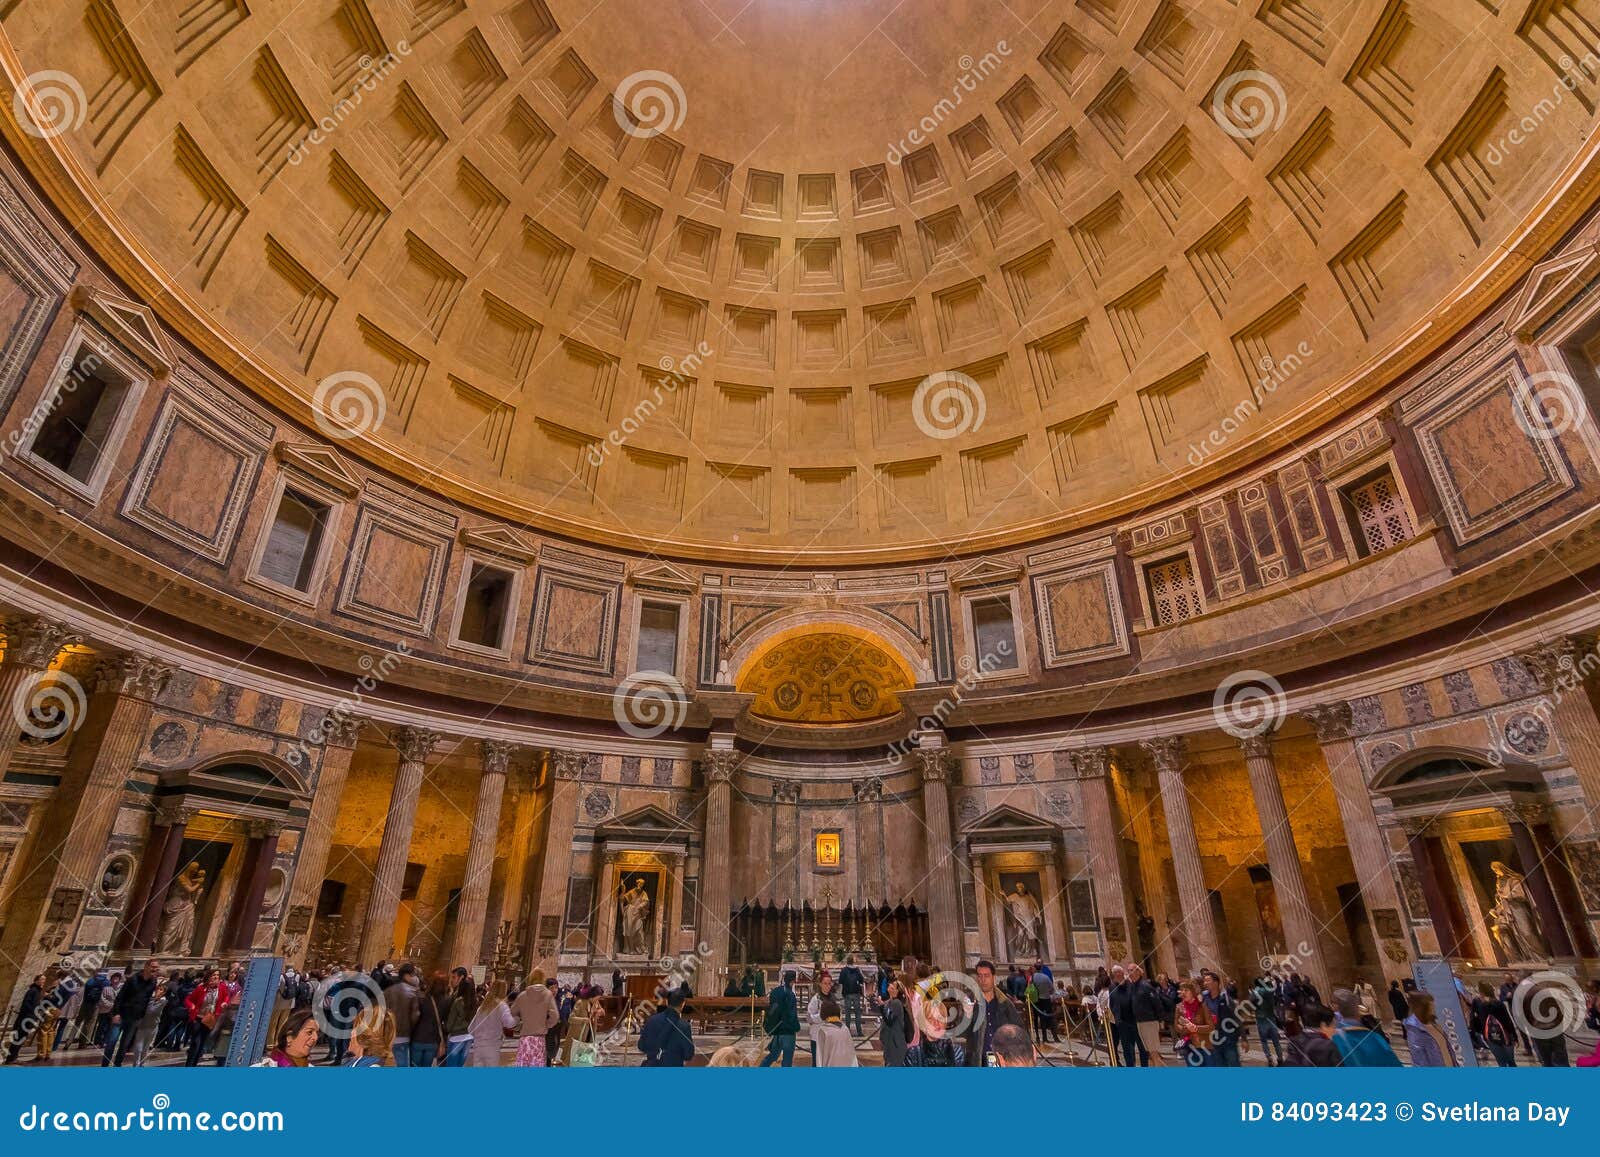 Interior Of The Pantheon In Rome Italy Editorial Stock Photo